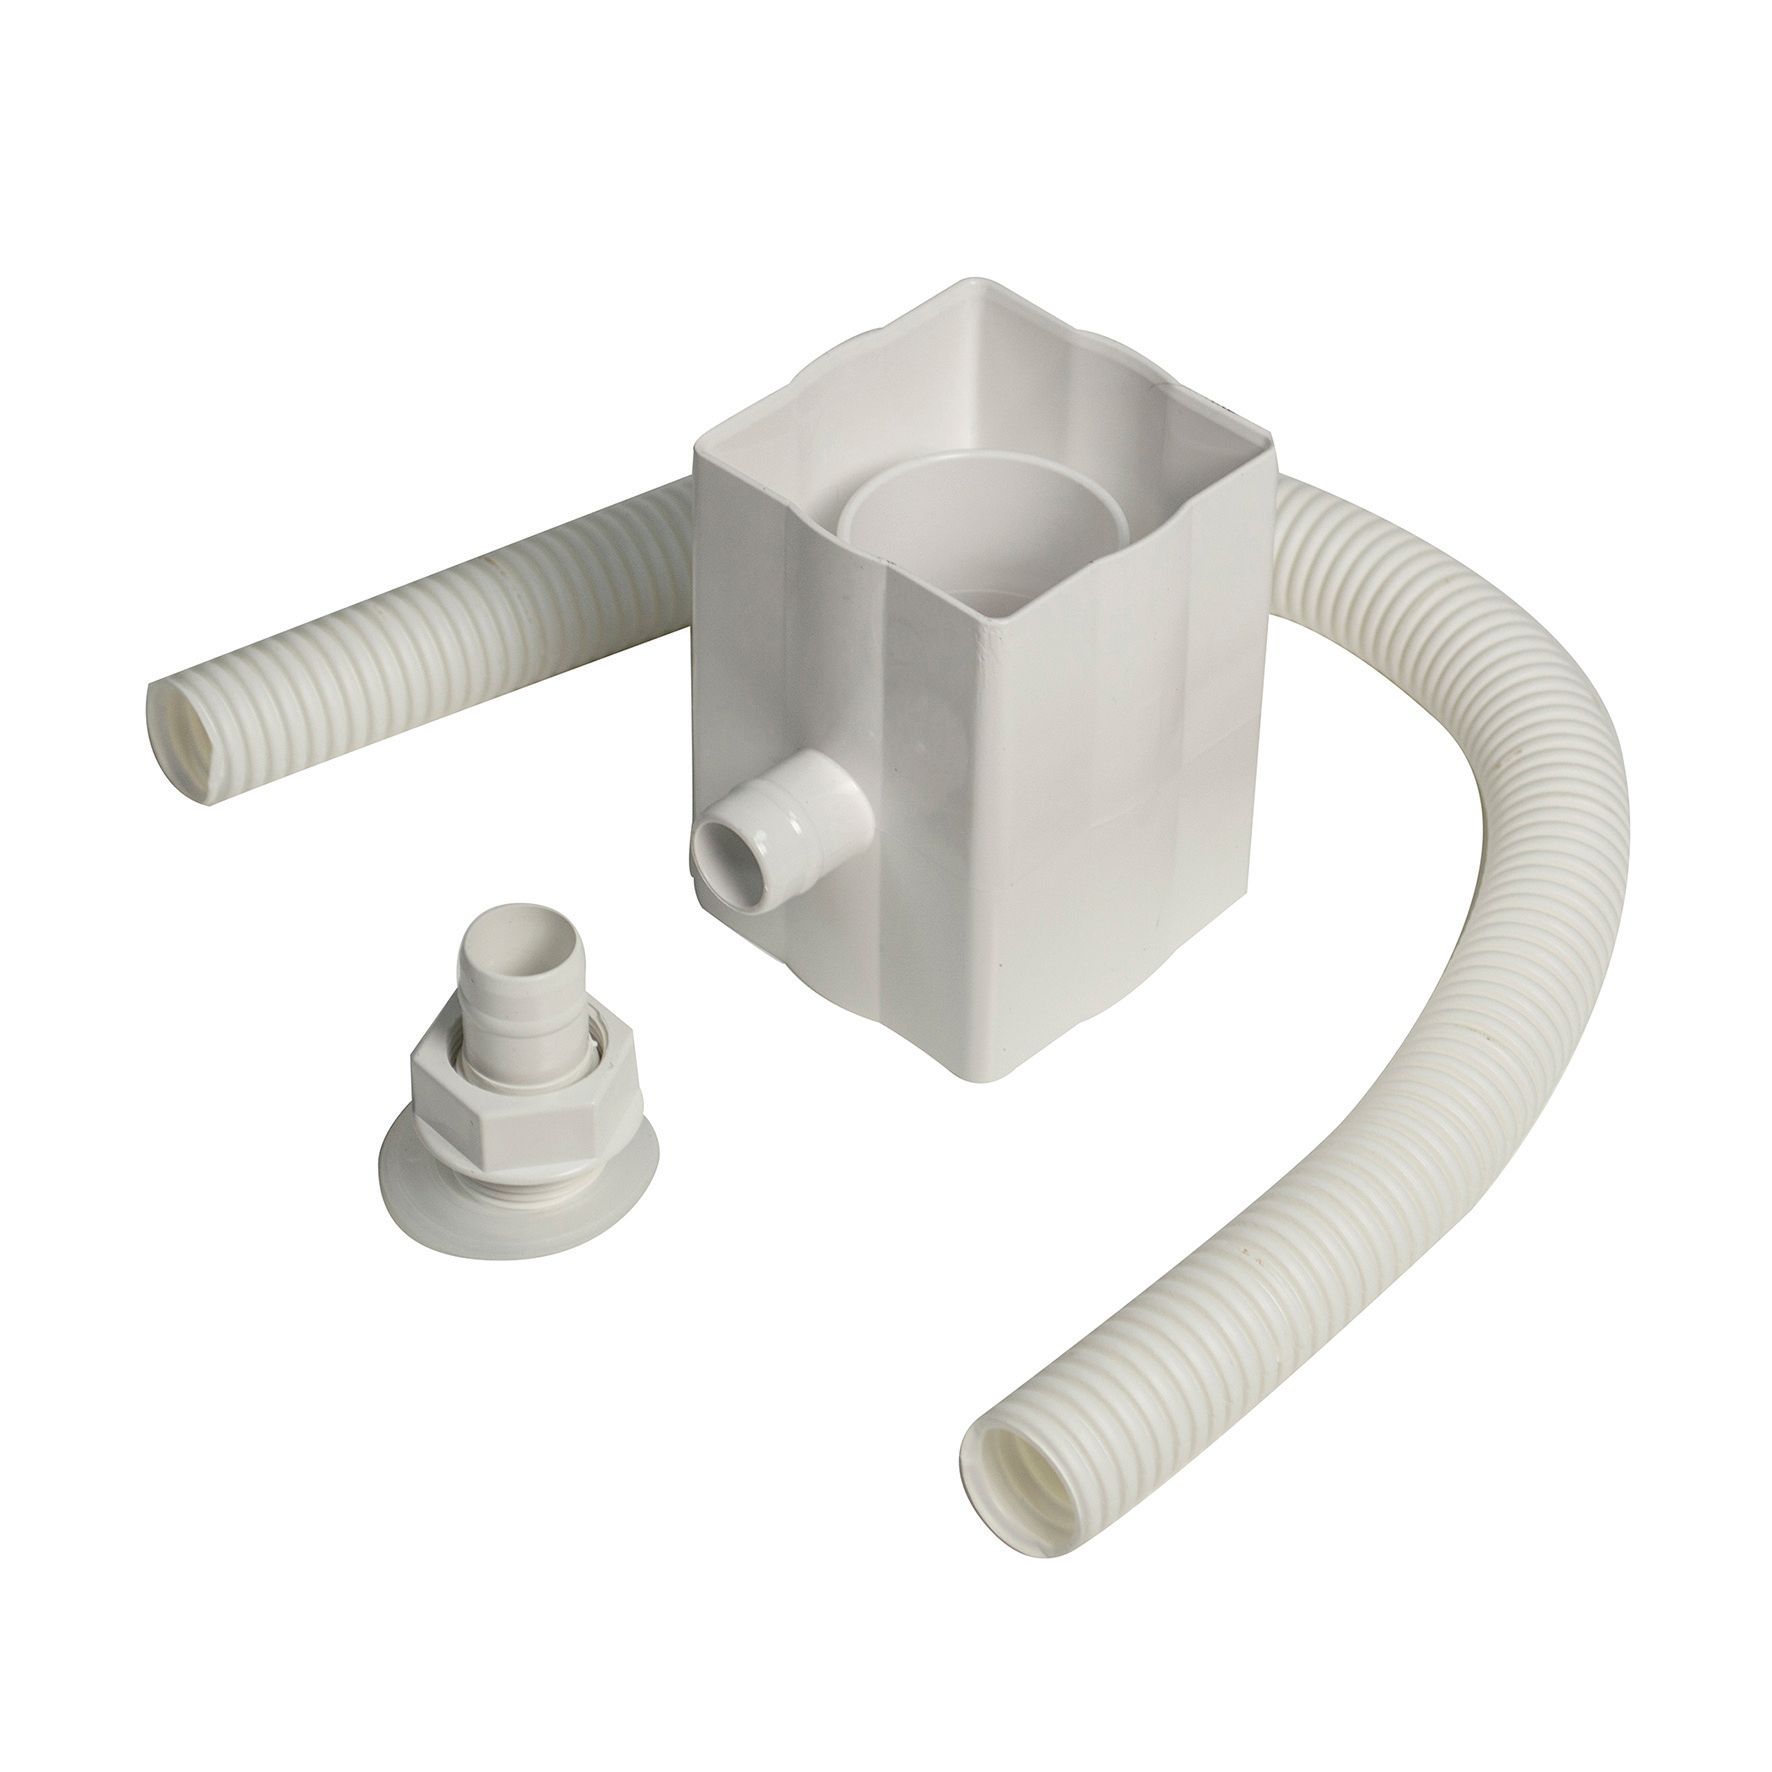 Image of Floplast 68mm Round or 65mm Square Downpipe Water Butt Rain Diverter - White